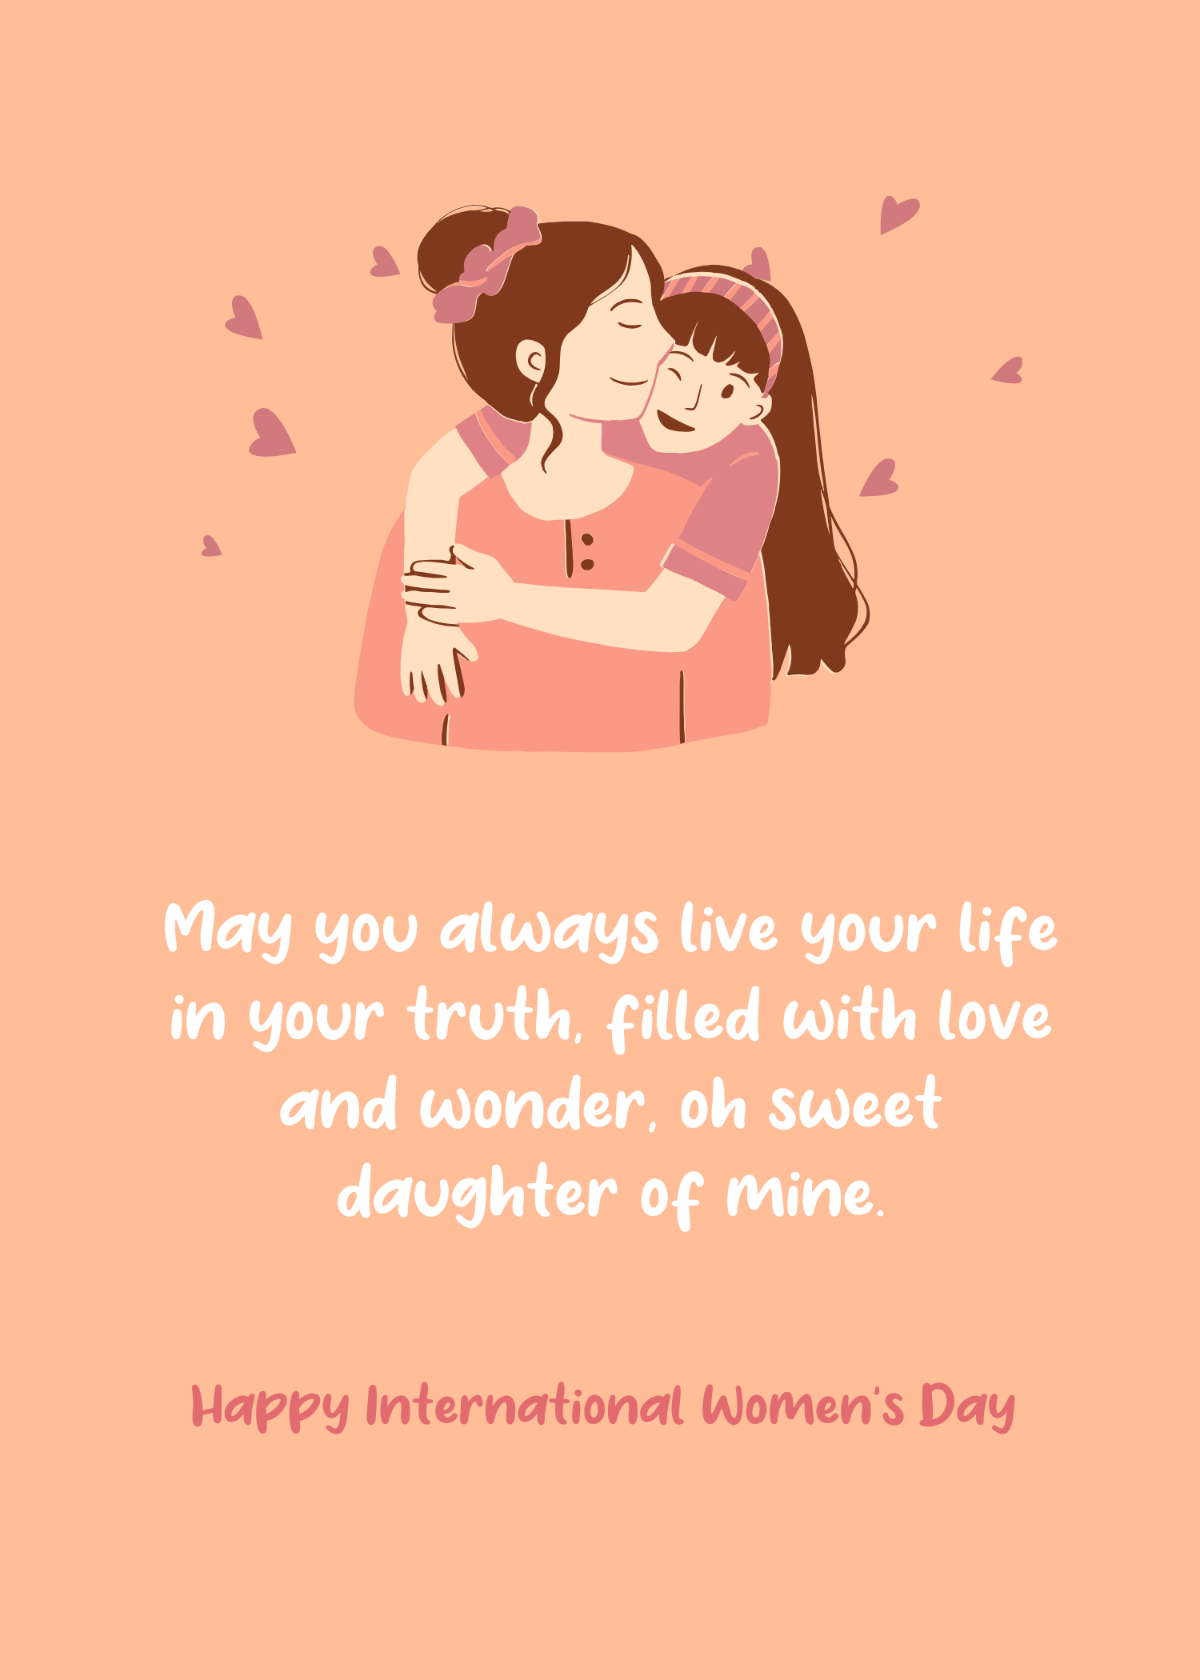 Happy International Women's Day Message to Daughter